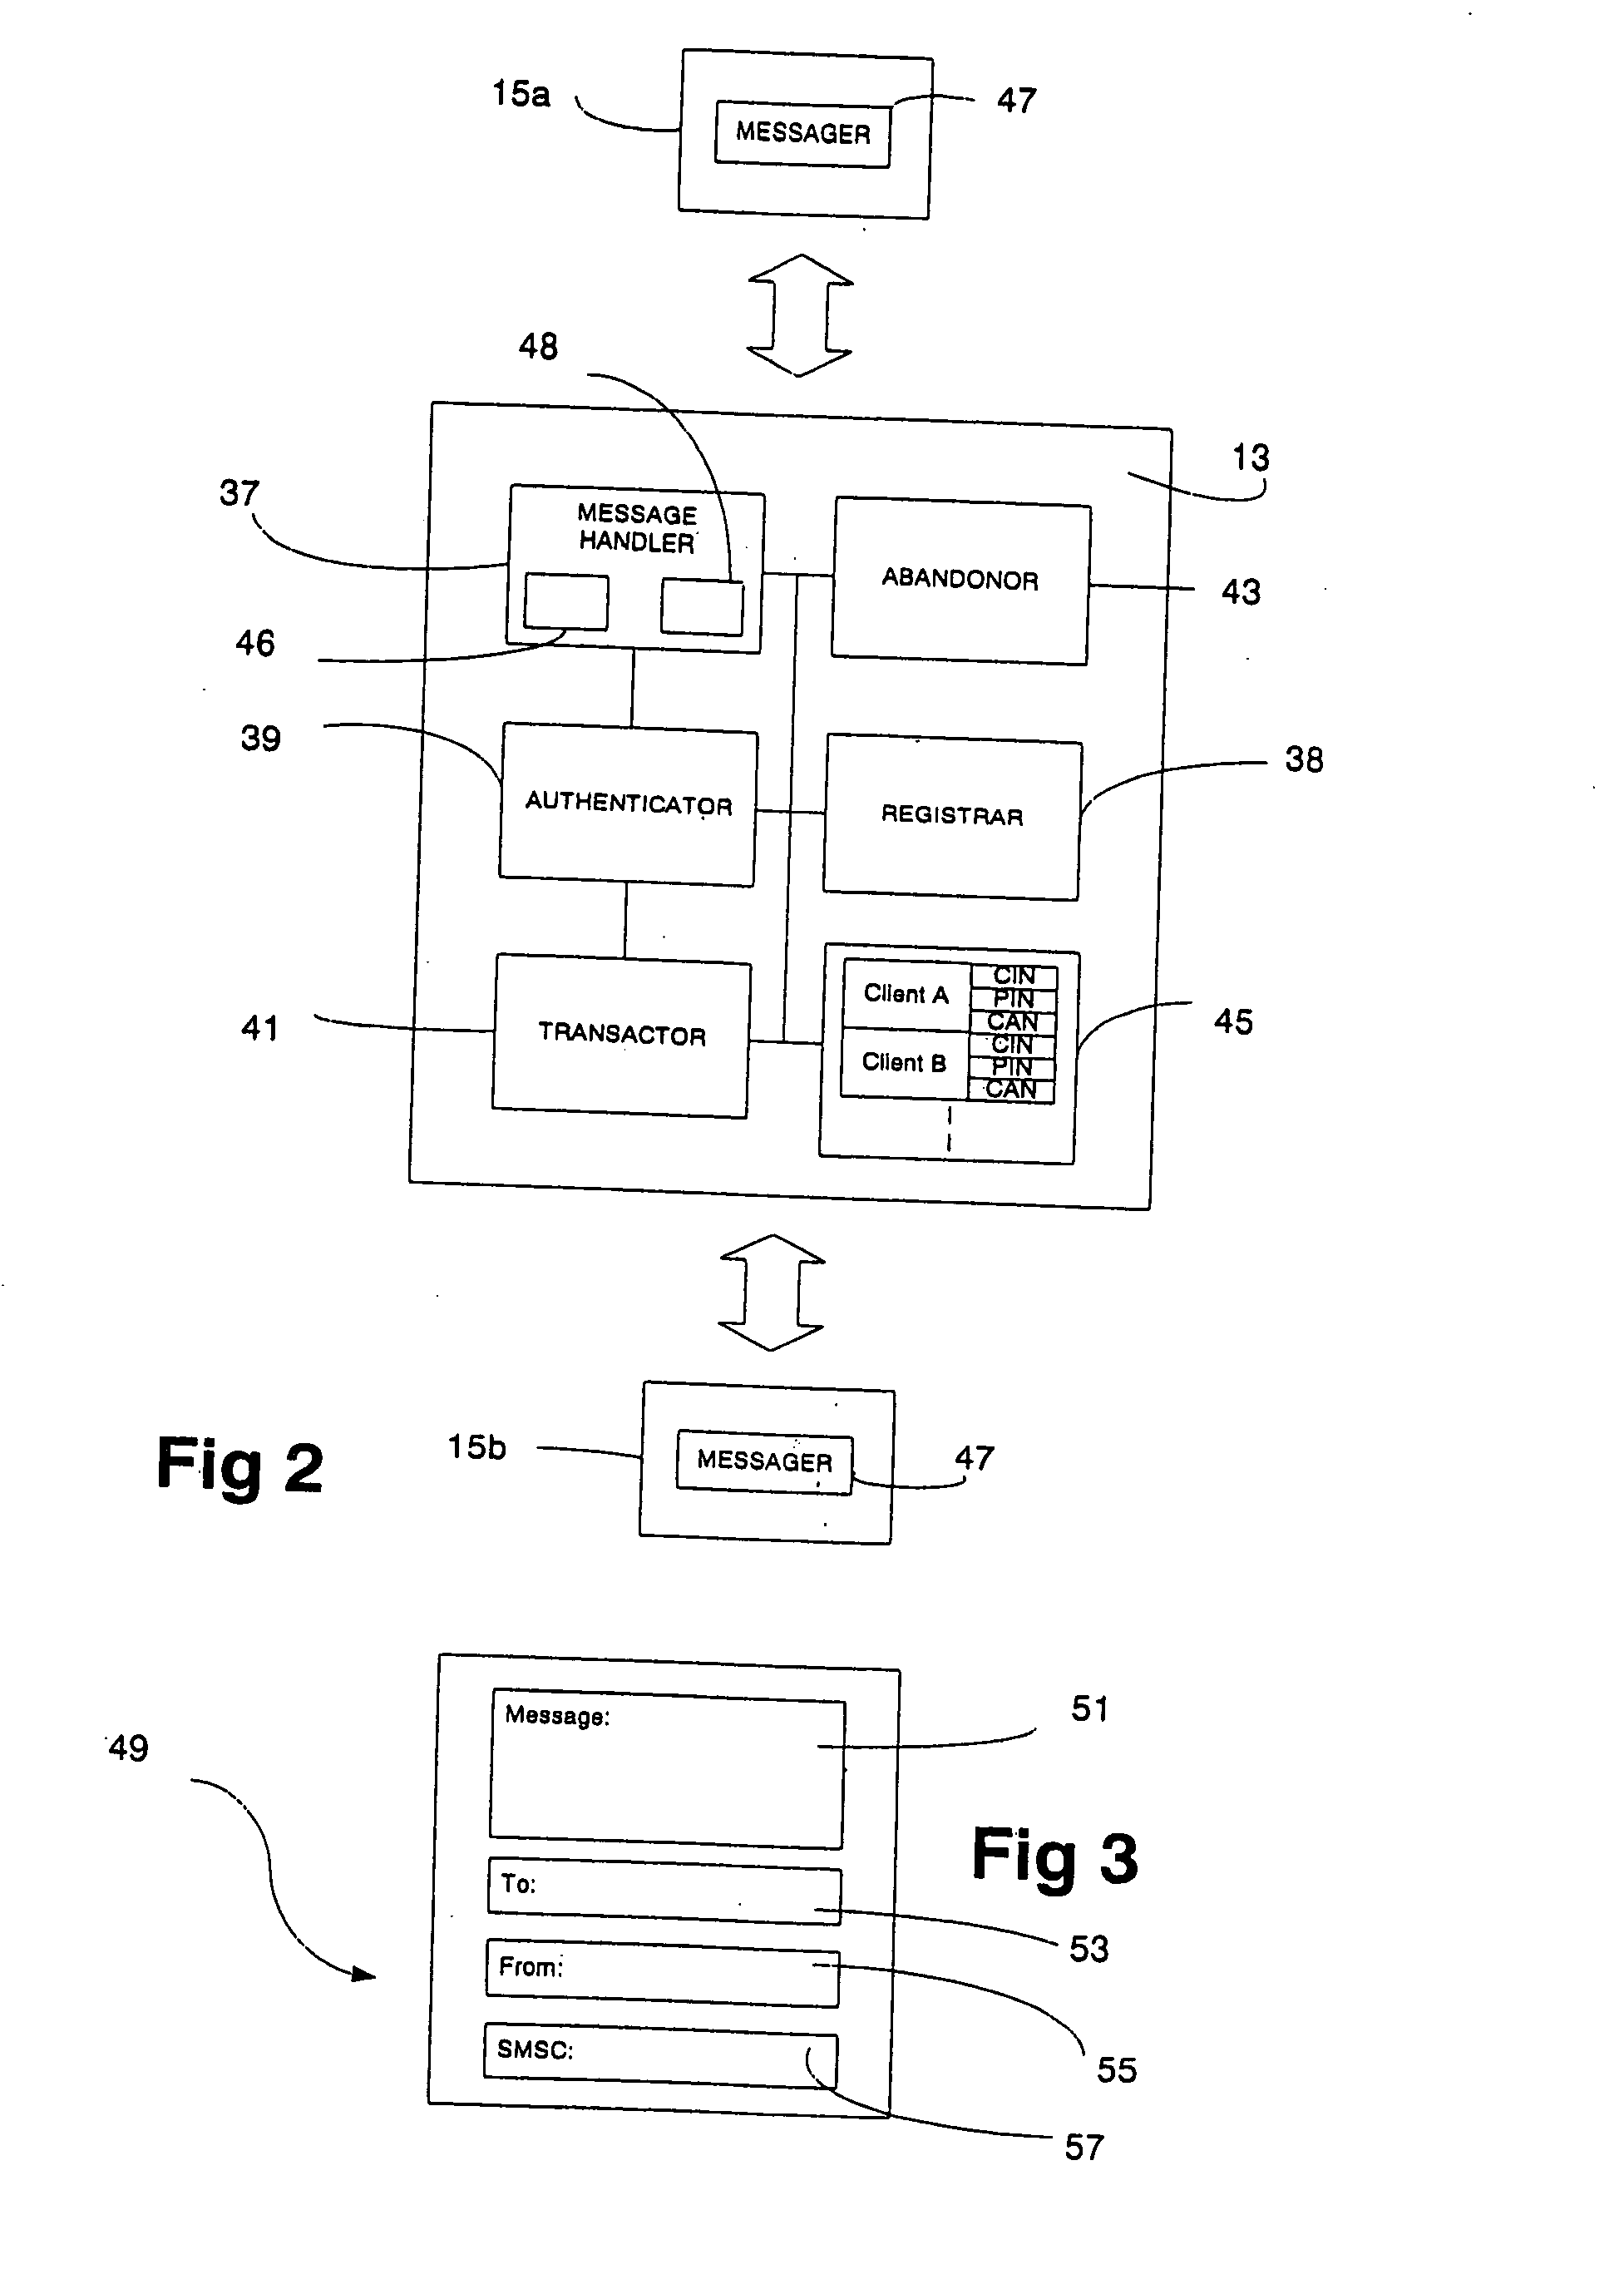 Financial transaction system and method using electronic messaging